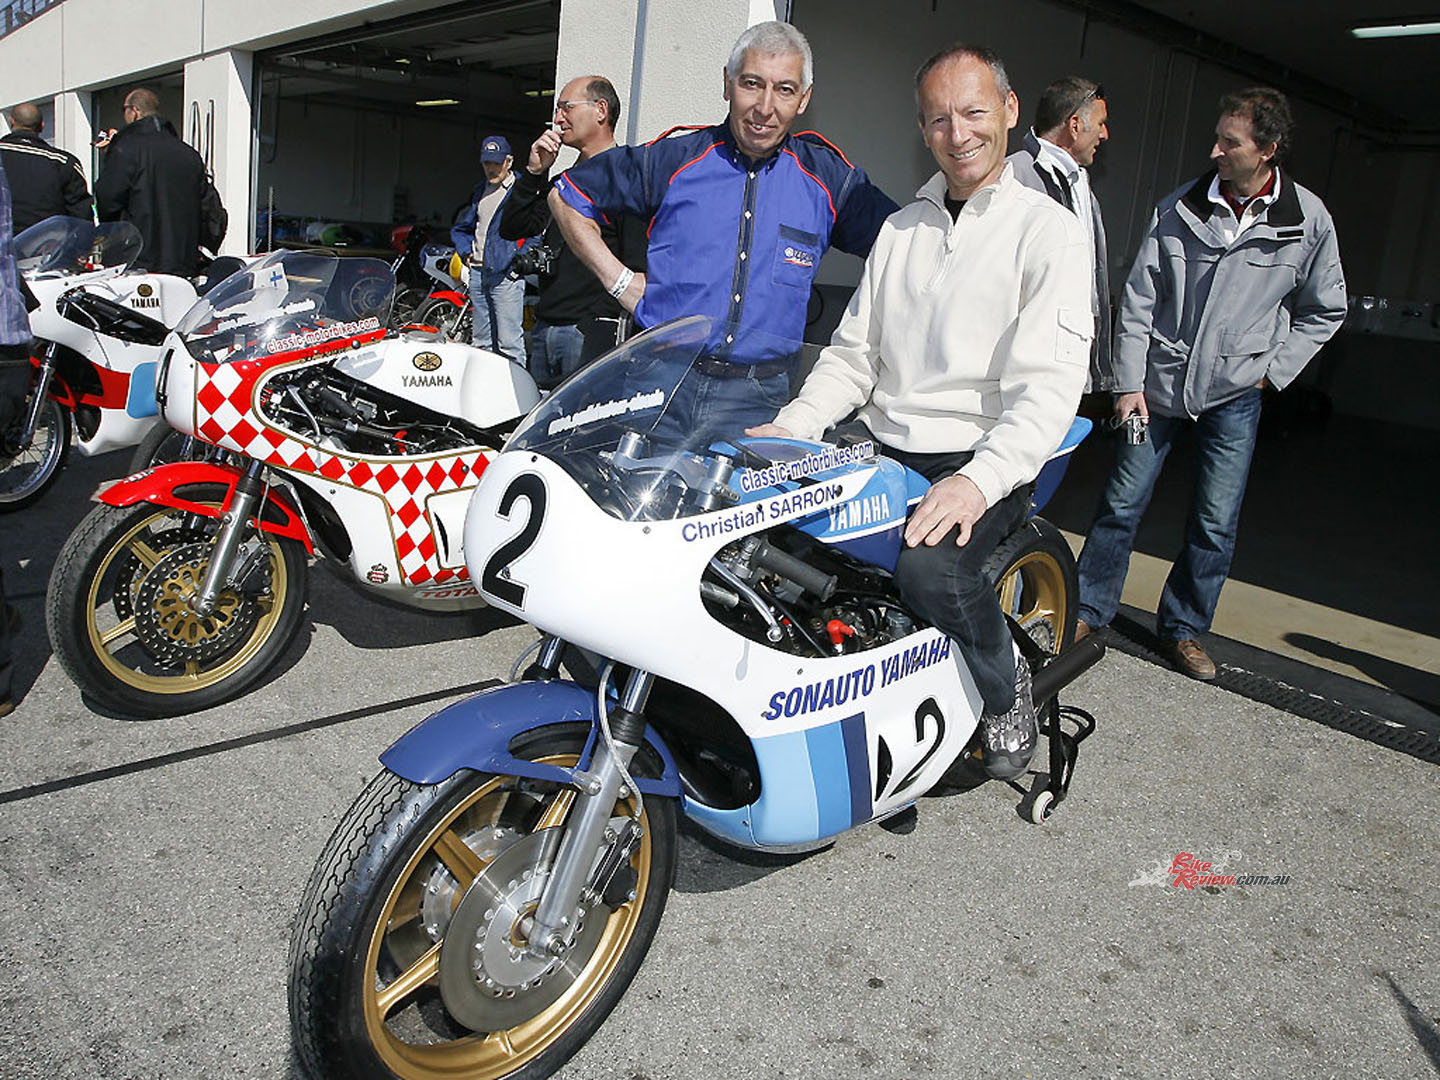 Sarron and Rigal were reunited with the endurance OW31's in 2008, now wearing the tradition "sprint" fairing.